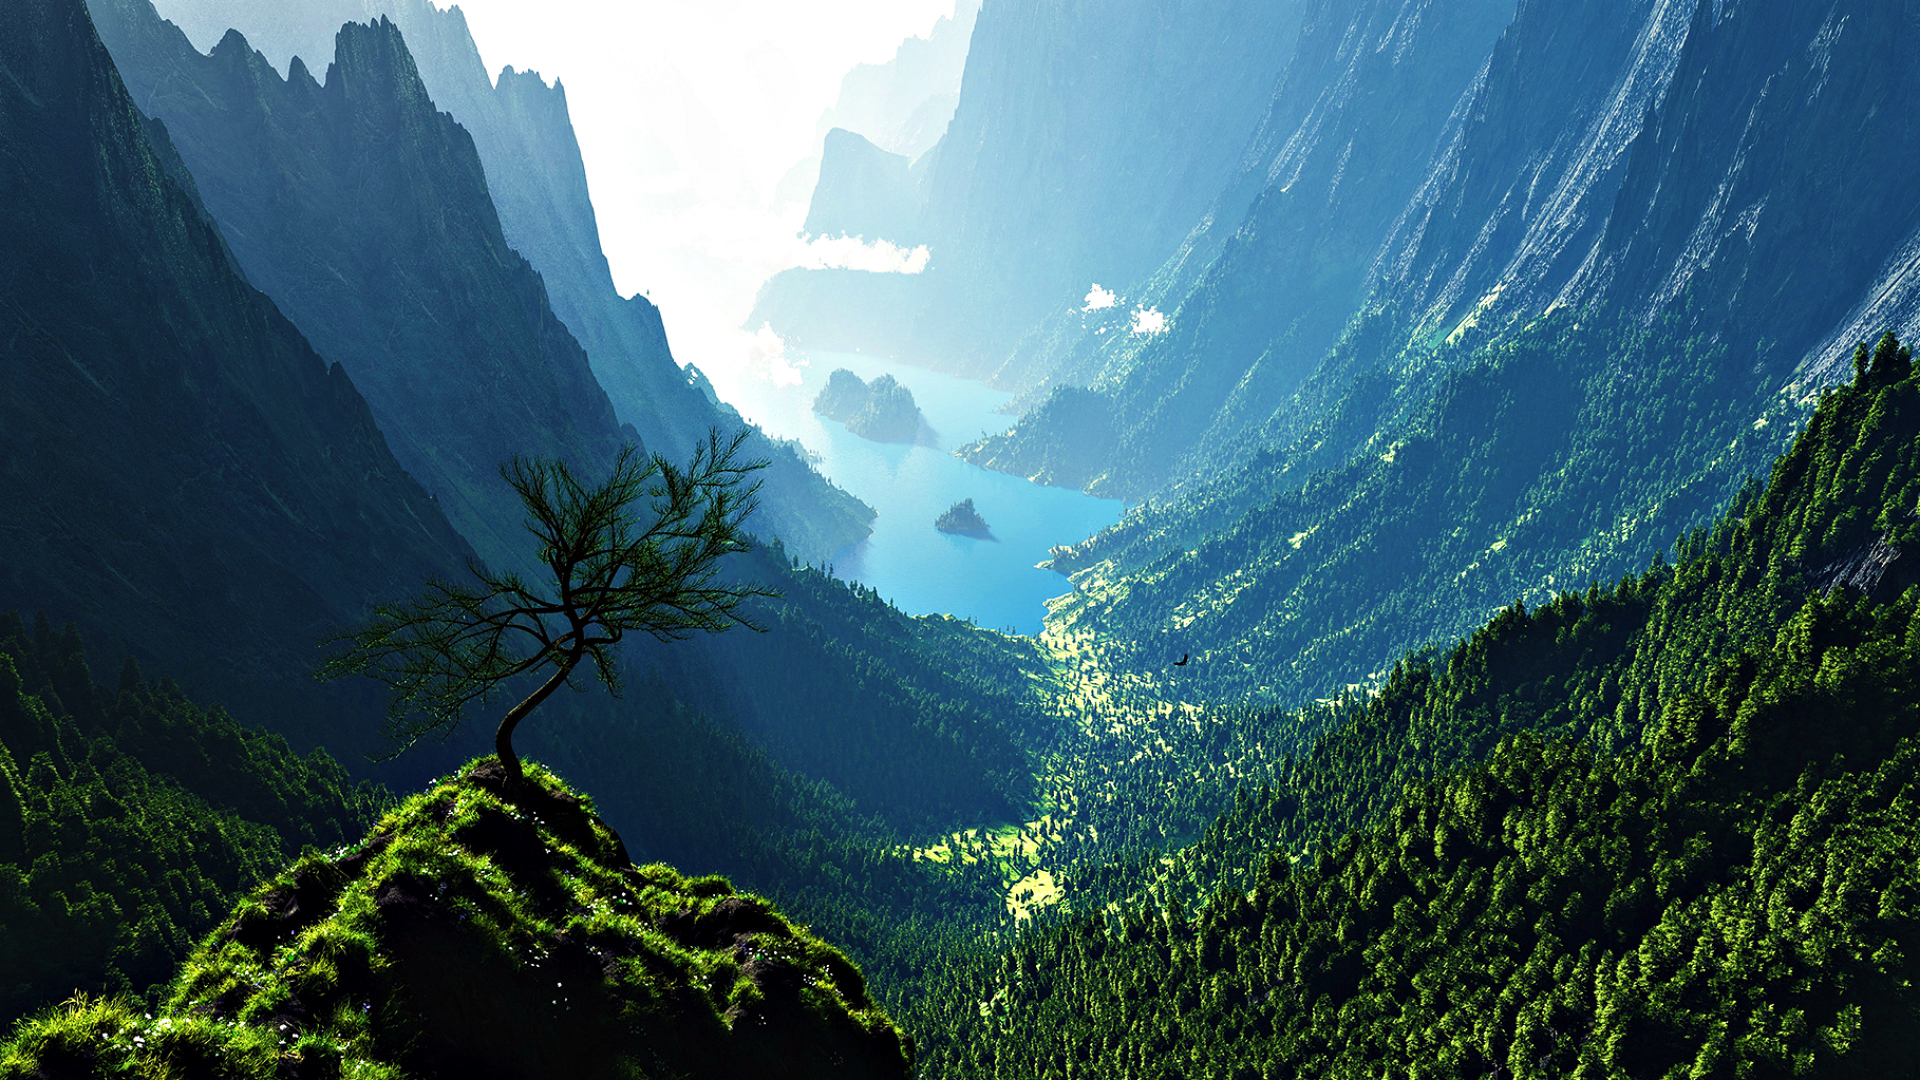 Cool Mountain Valley 29912 2560x1600 px